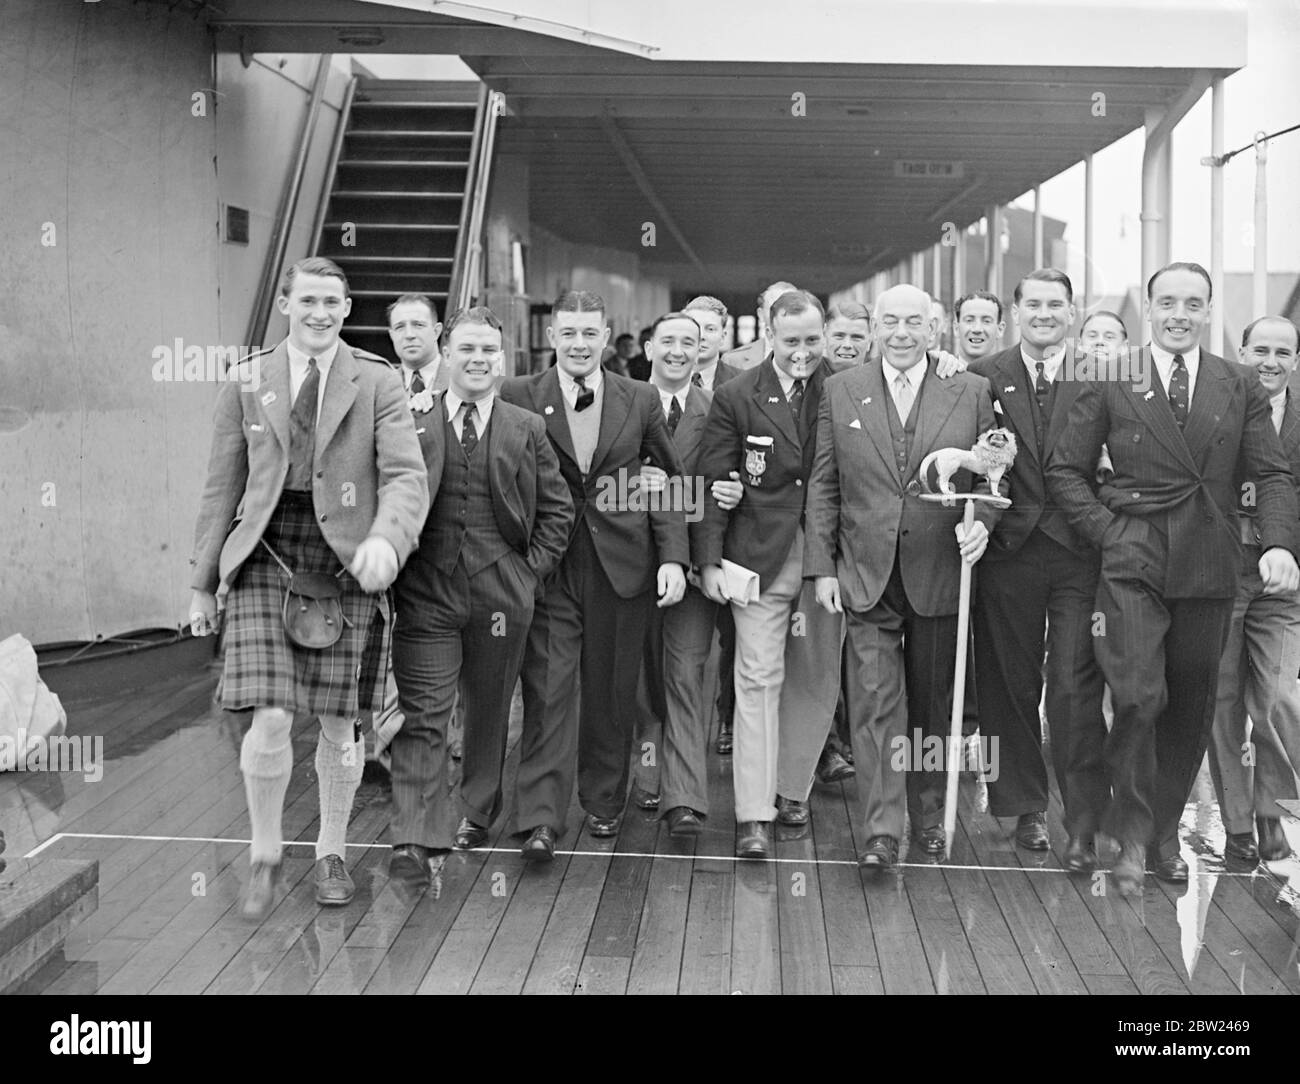 The British rugby team which has been touring South Africa Captained by Sam Walker arrived at Southampton on the Athlone Castle on the return home. The team's tour was highly successful. Out of 24 matches played, 17 were won by the British team, seven being lost. This record is the best of any team that has visited South Africa for 35 years. Photo shows: The British rugby team on their arrival at Southampton. Centre is Major Hartley, the manager, with lion-stick mascot, and on his right is Sam Walker, the captain. 7 October 1938 Stock Photo